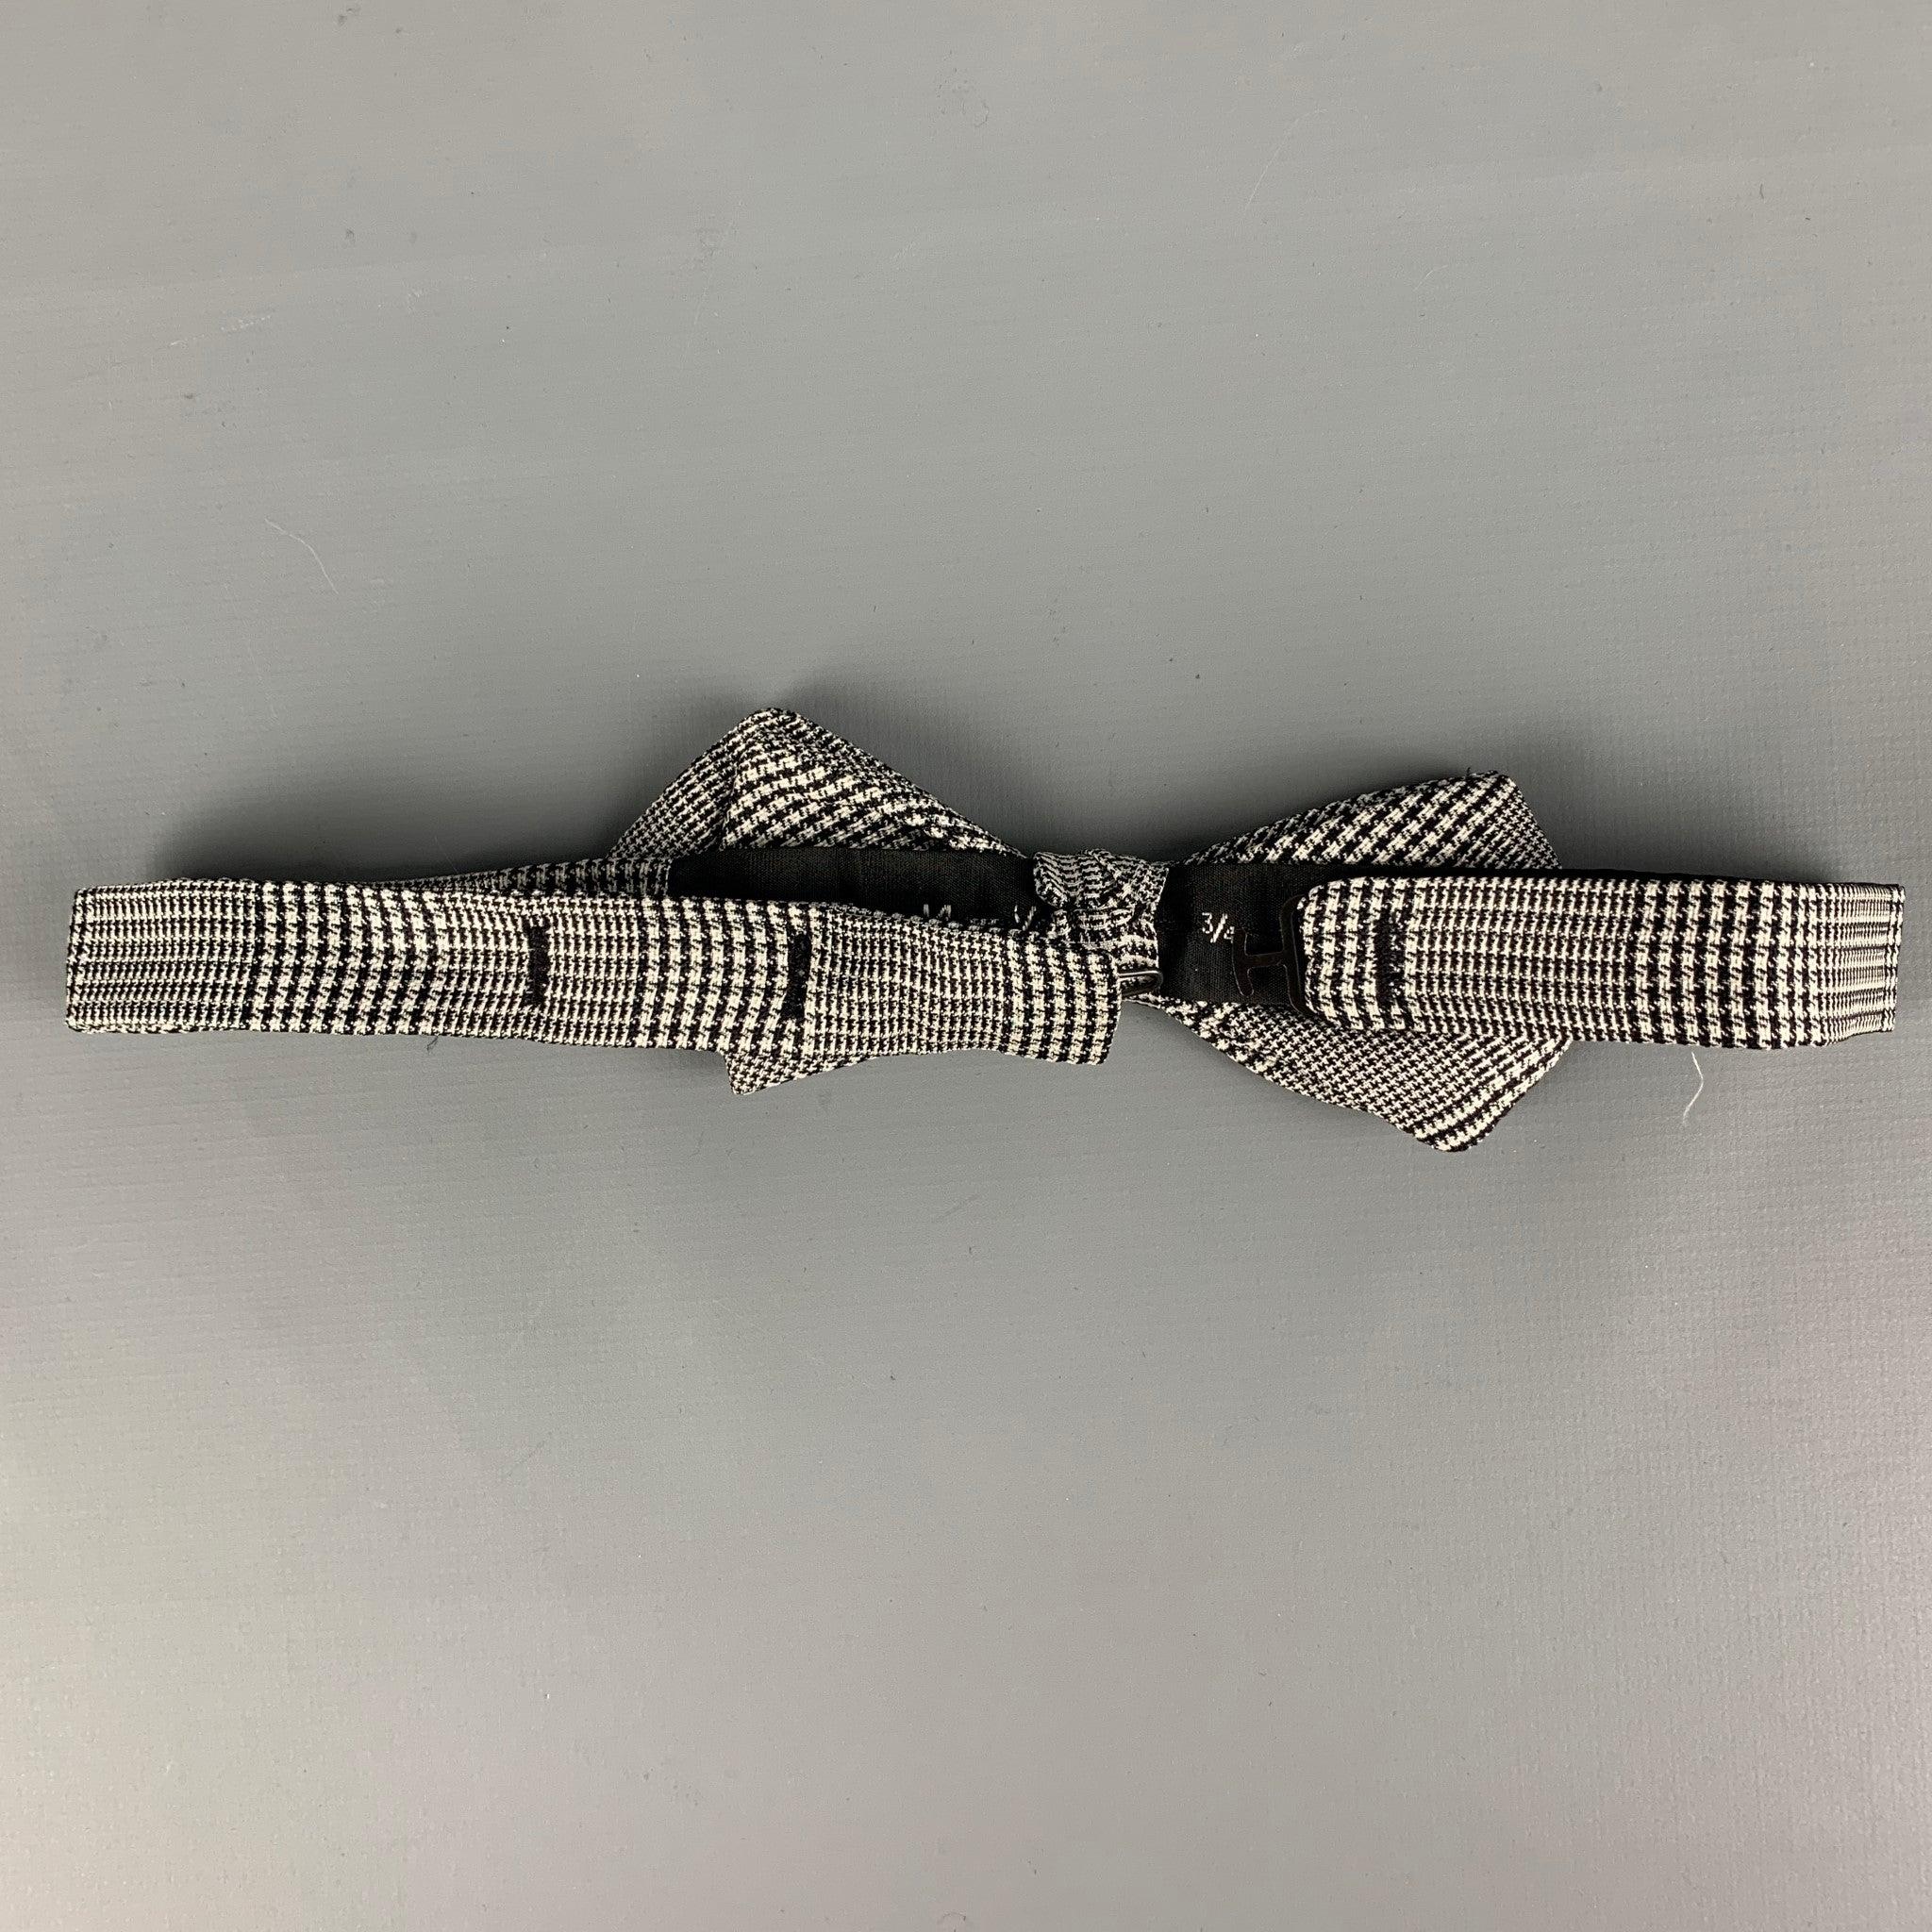 VALENTINO bow tie comes in a black & white houndstooth silk featuring a adjustable fit.
 Very Good Pre-Owned Condition.
 Height: 2.5 inches 
  
  
  
 Sui Generis Reference: 118694
 Category: Bow Tie
 More Details
  
 Brand: VALENTINO
 Color: Black
